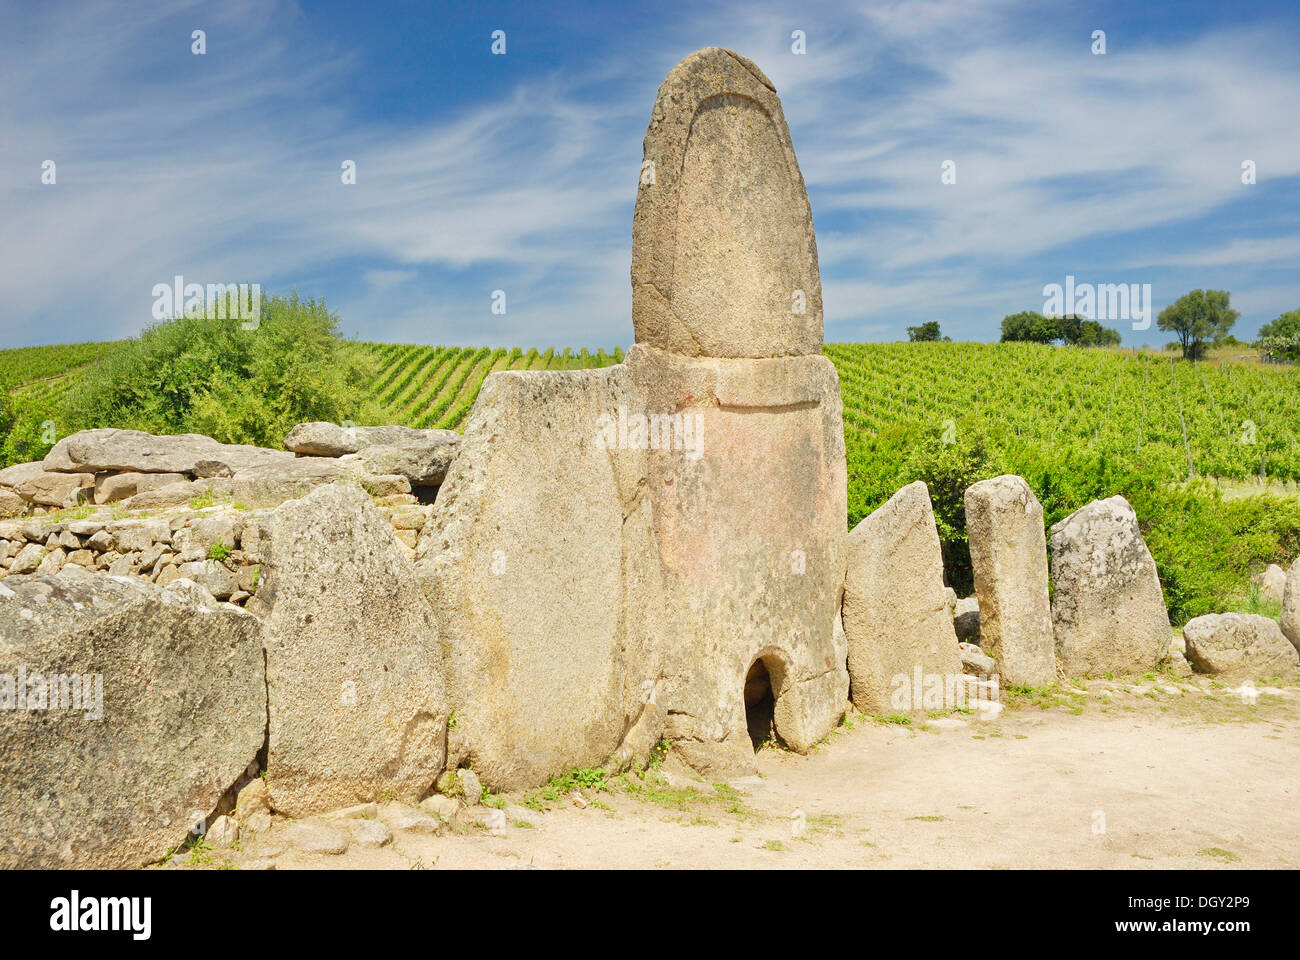 Prehistoric megalithic grave with granite stele, surrounded by vineyards, 1800 BC, Bronze Age, Tomba di Giganti Coddu Vecchju Stock Photo